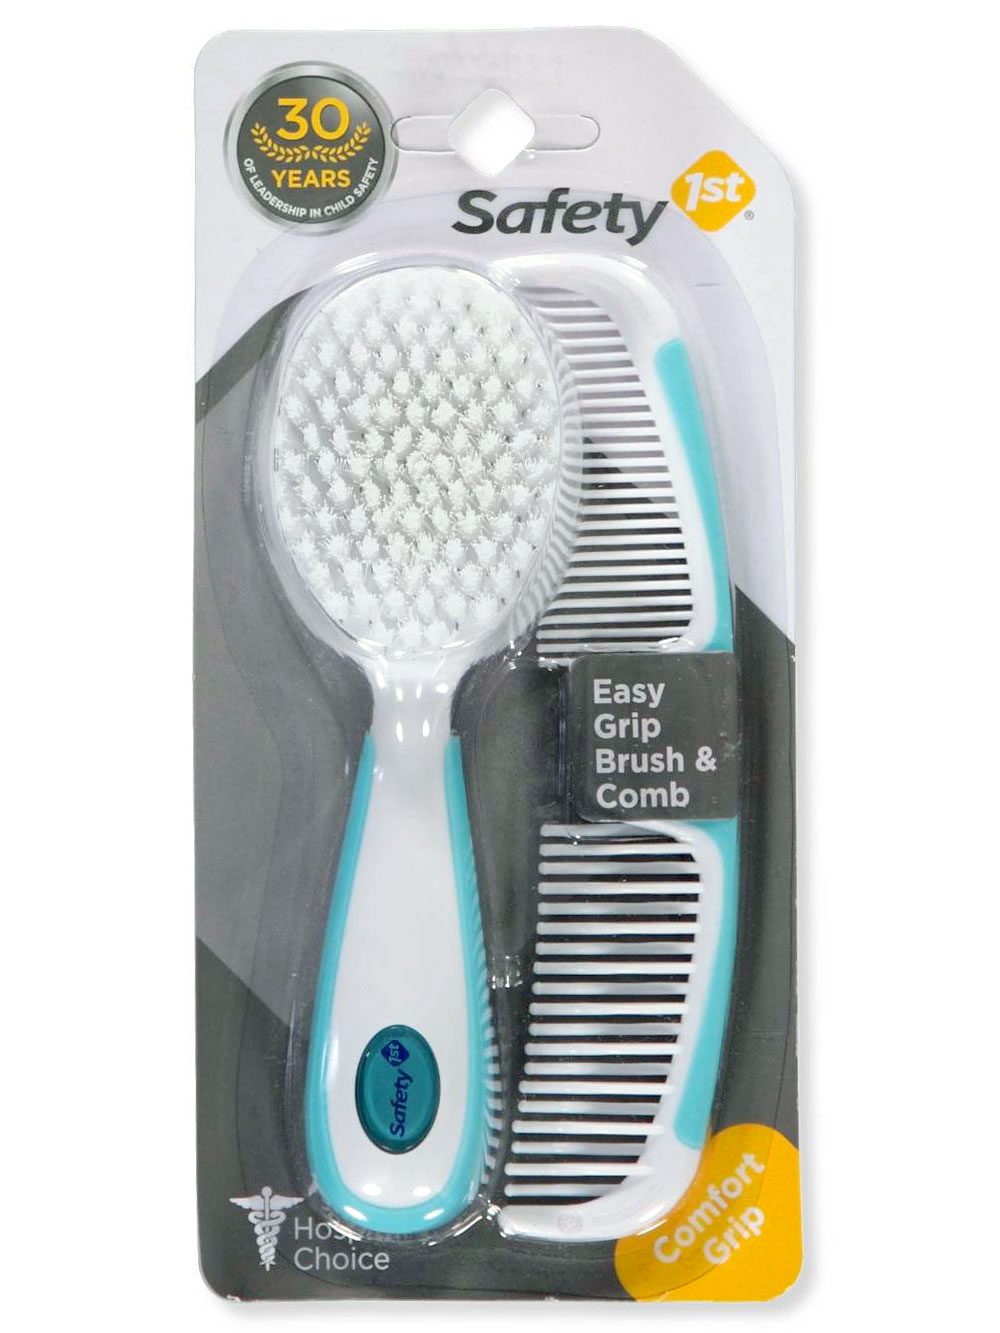 Safety 1st Easy Grip Brush & Comb Set - mint blue, one size